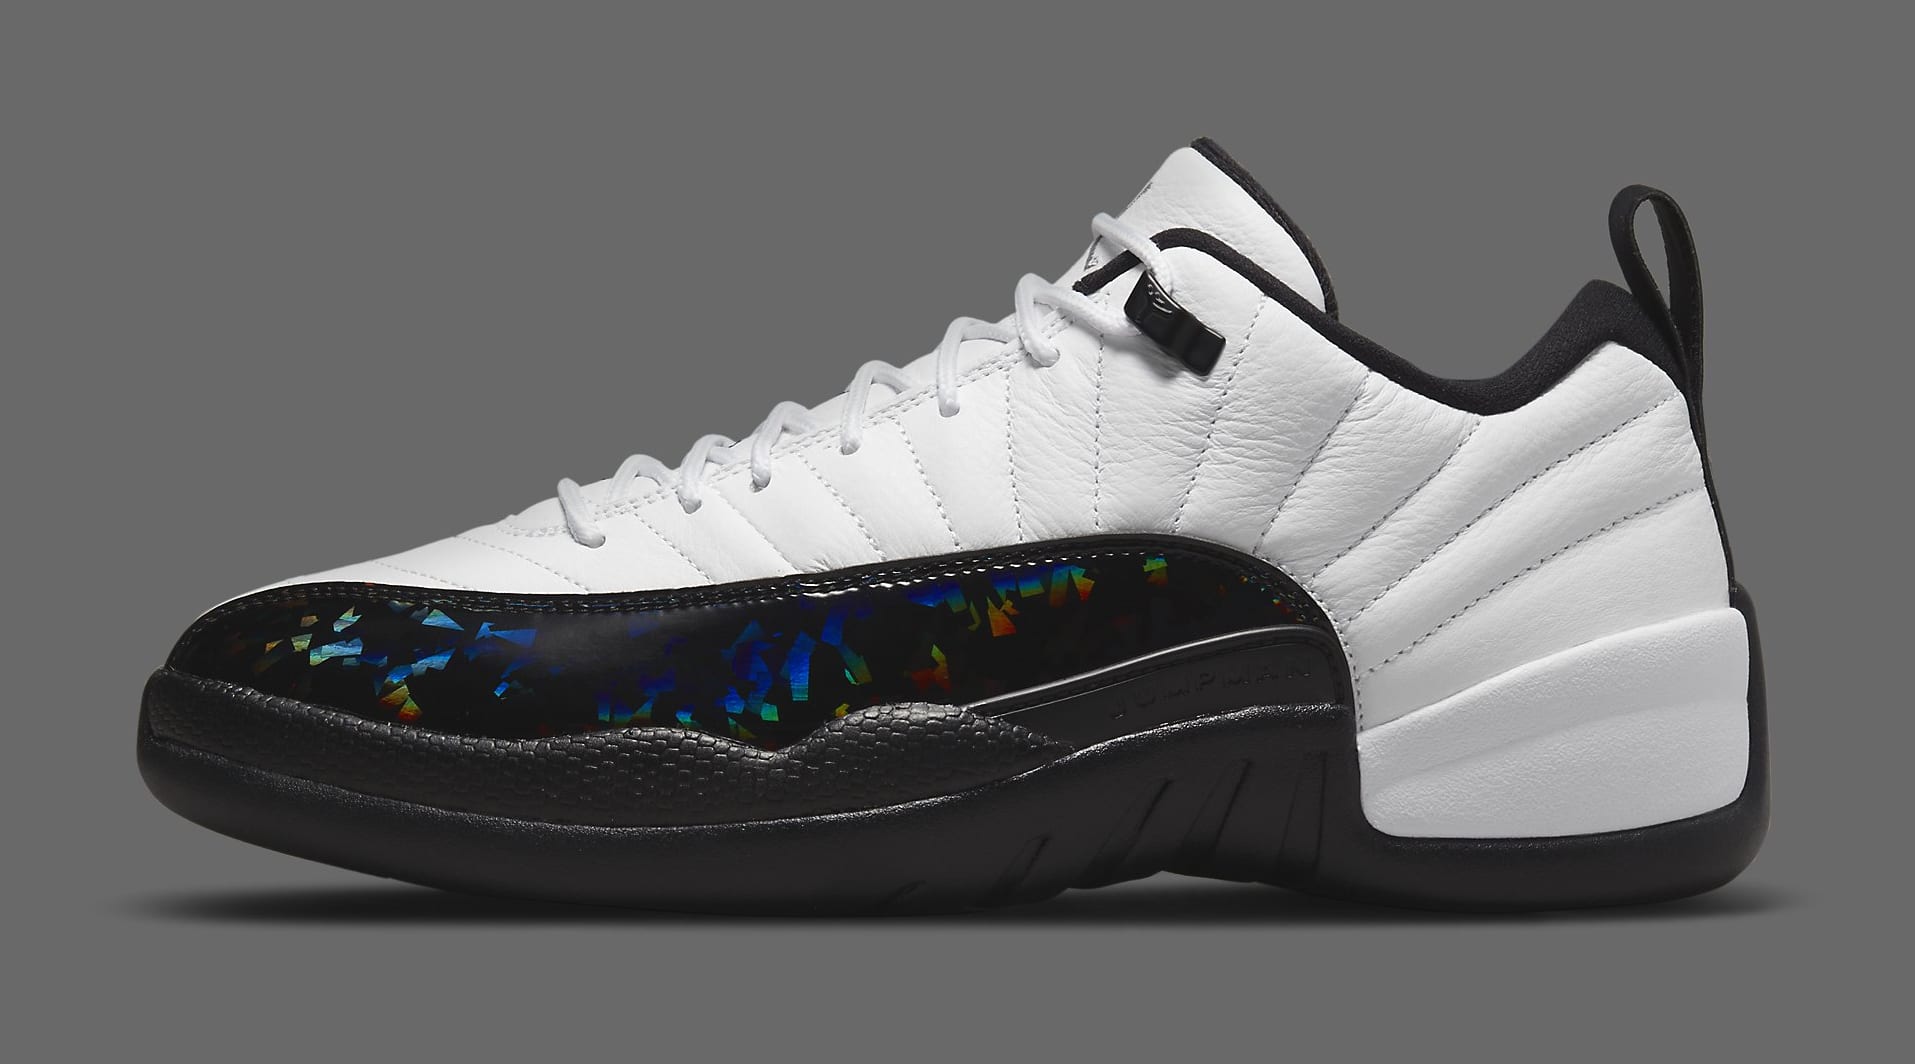 Air Jordan 12 Retro Low “Taxi” – must be the shoes